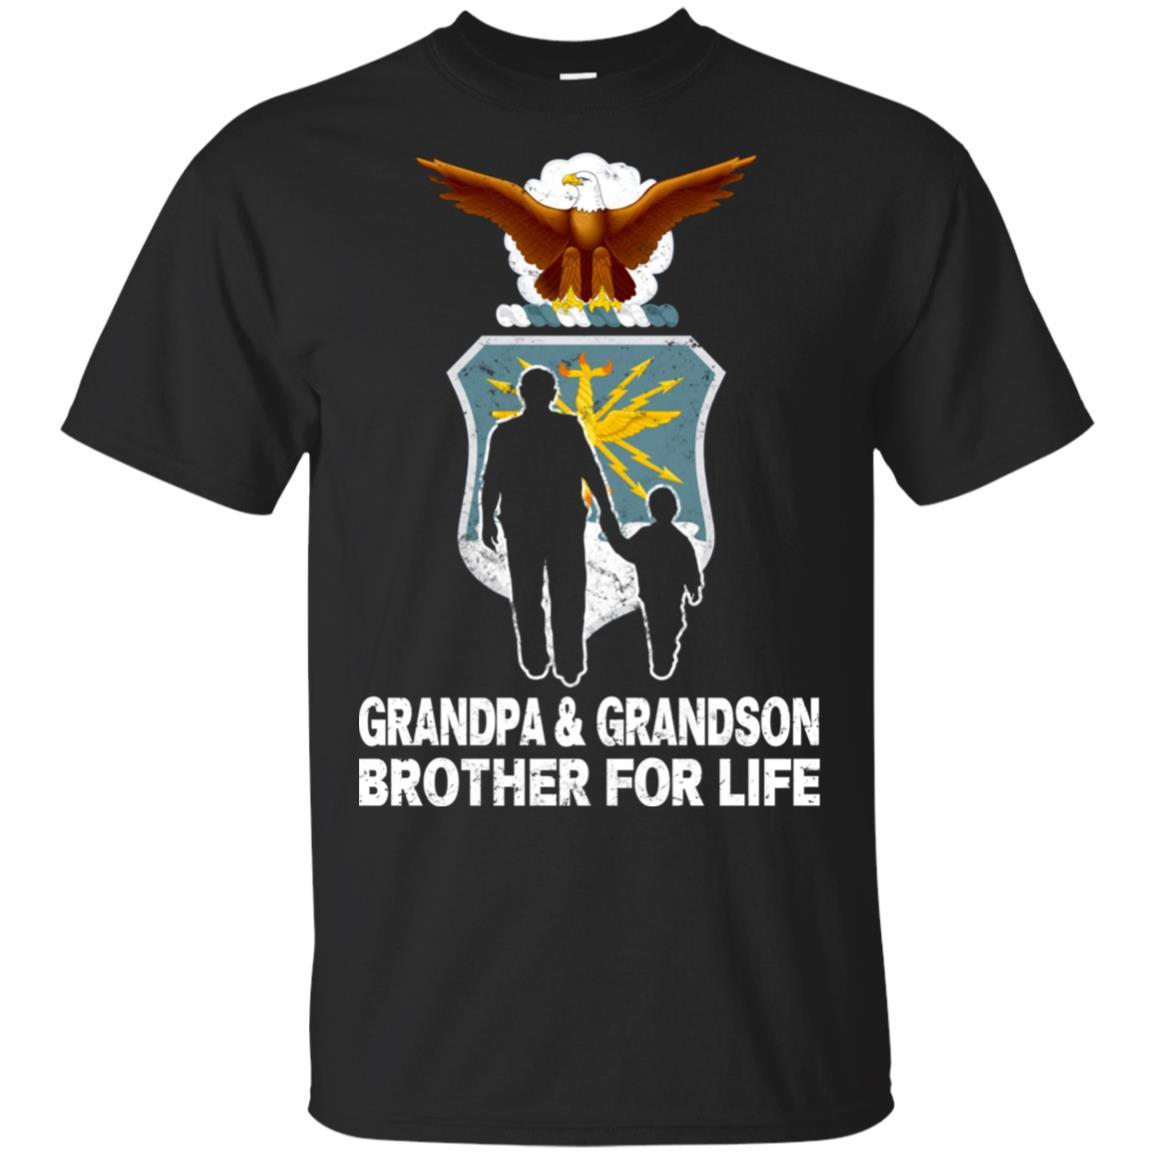 AIR FORCE GRANDPA AND GRANDDAUGHTER ( GRANDSON ) BROTHER FOR LIFE T-Shirt On Front